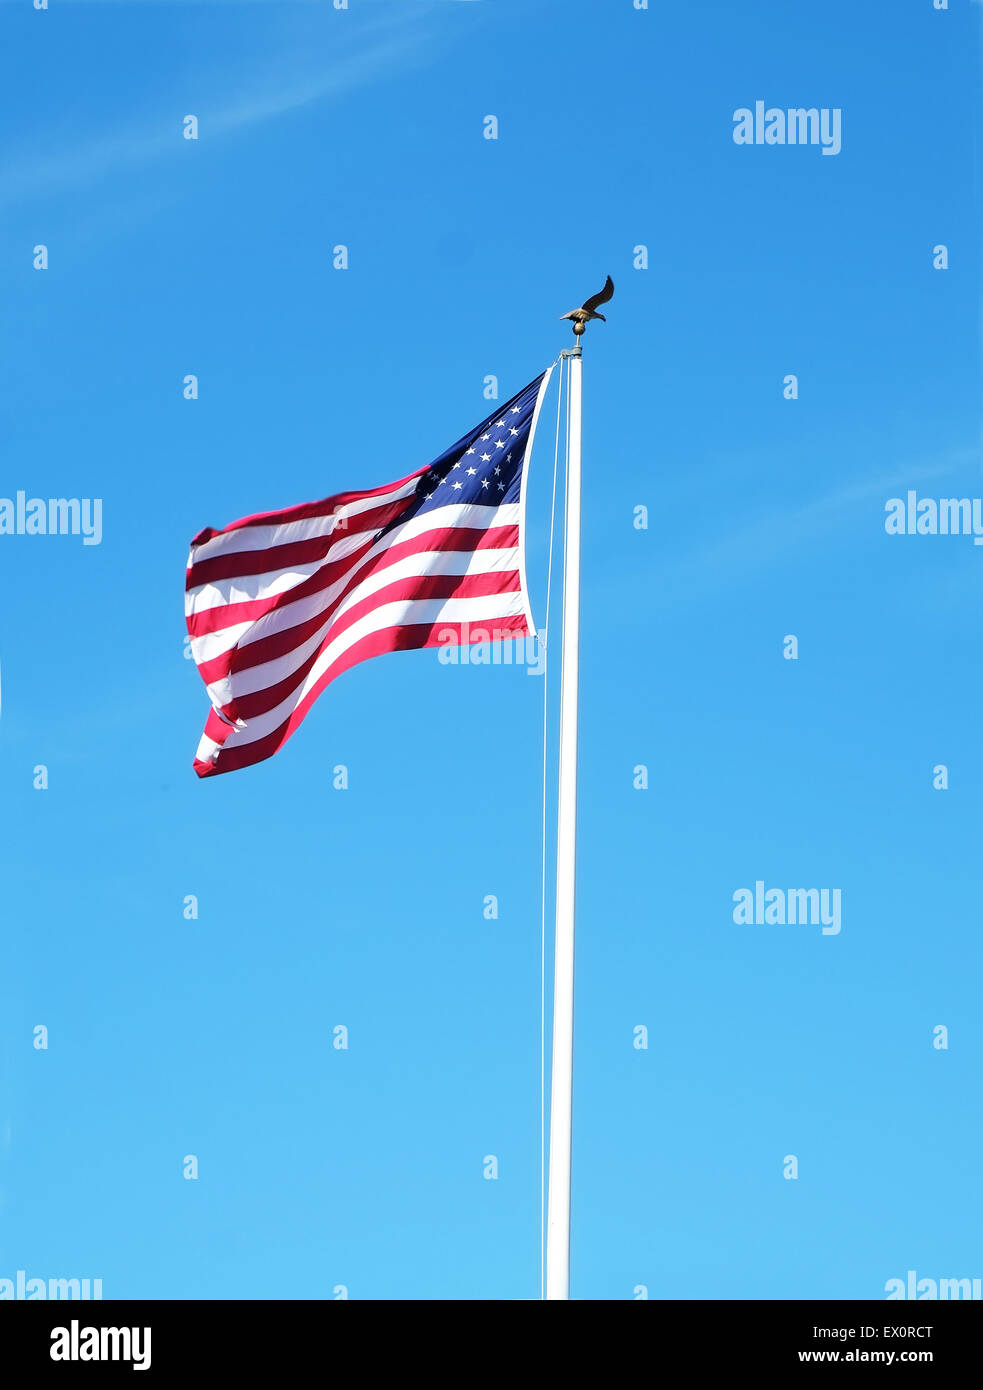 United States flag on a pole with a bright blue sky Stock Photo